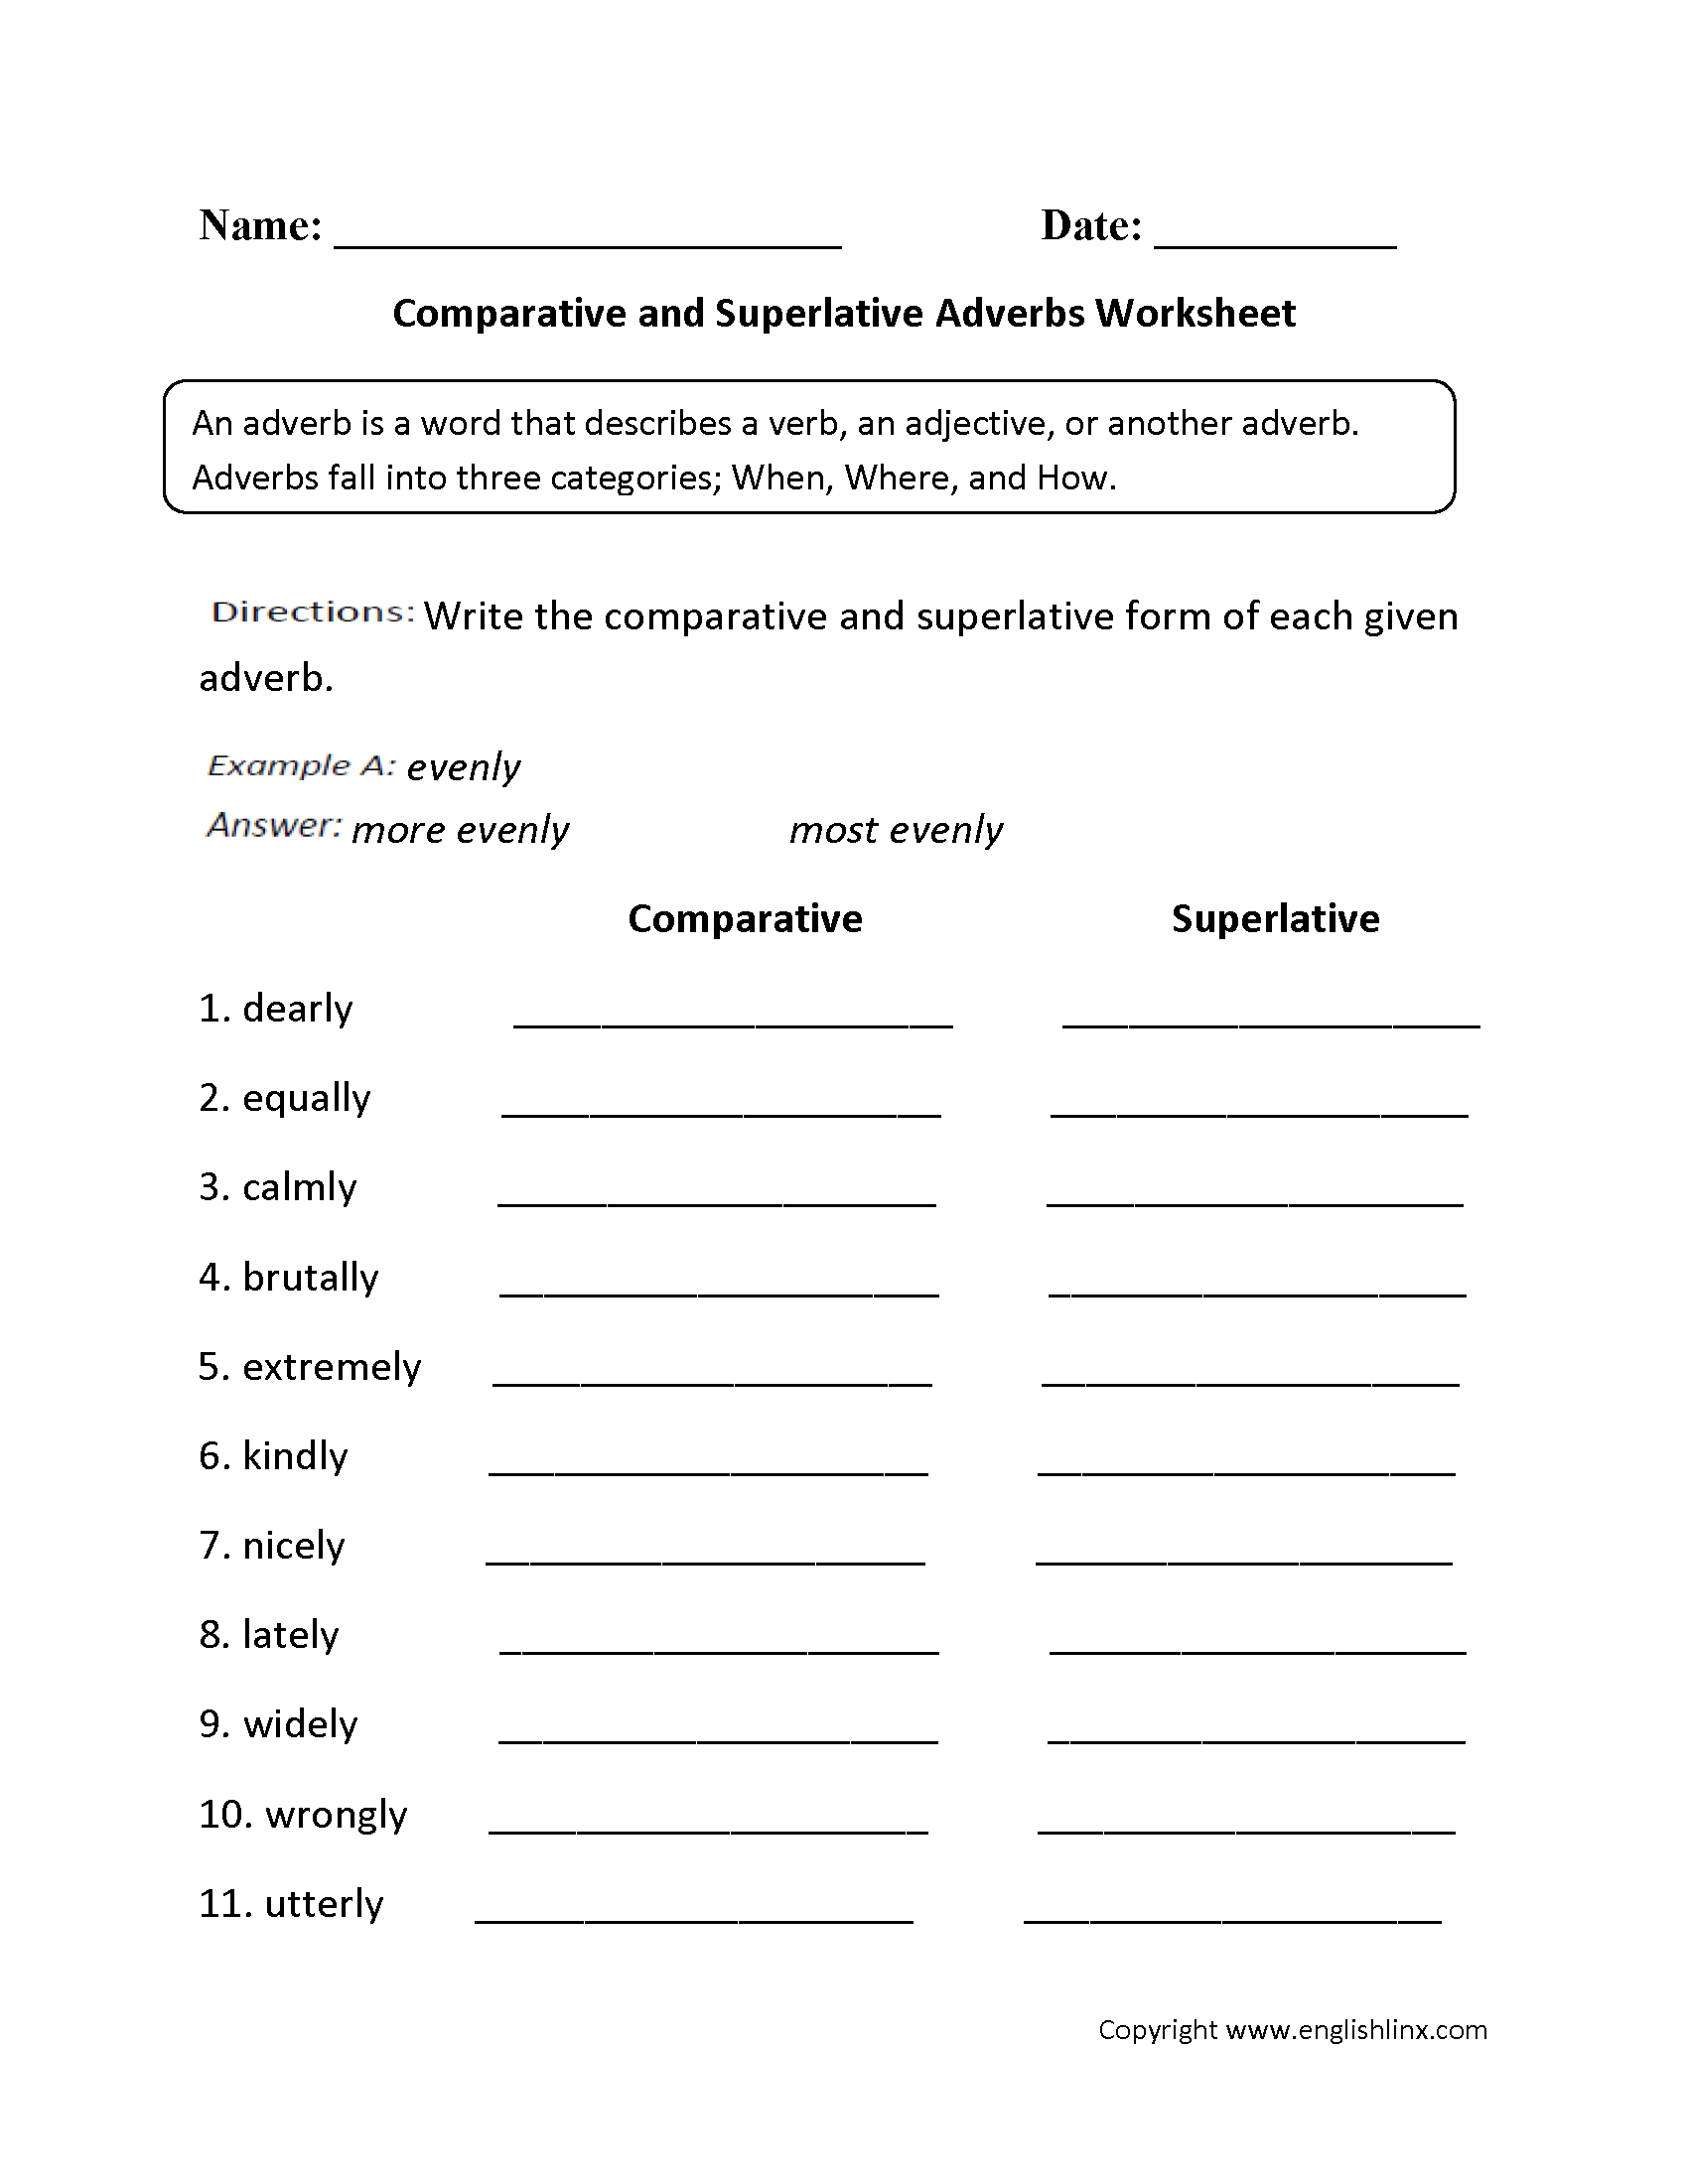 adjectives-worksheets-comparative-and-superlative-adjectives-worksheets